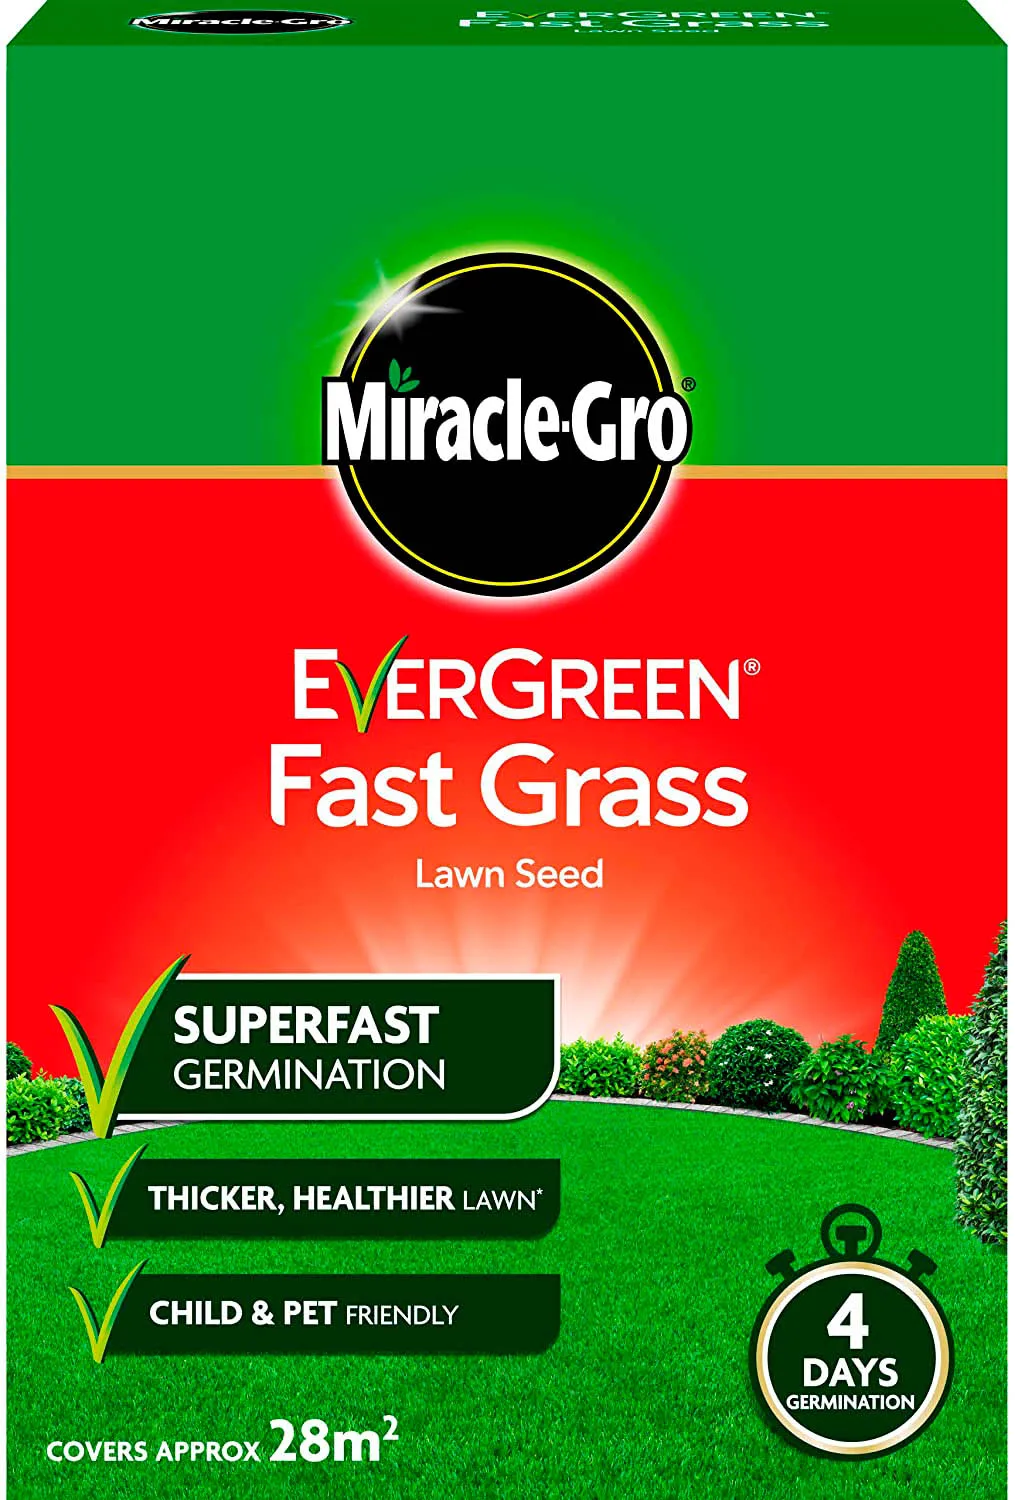 Miracle-Gro evergreen fast grass